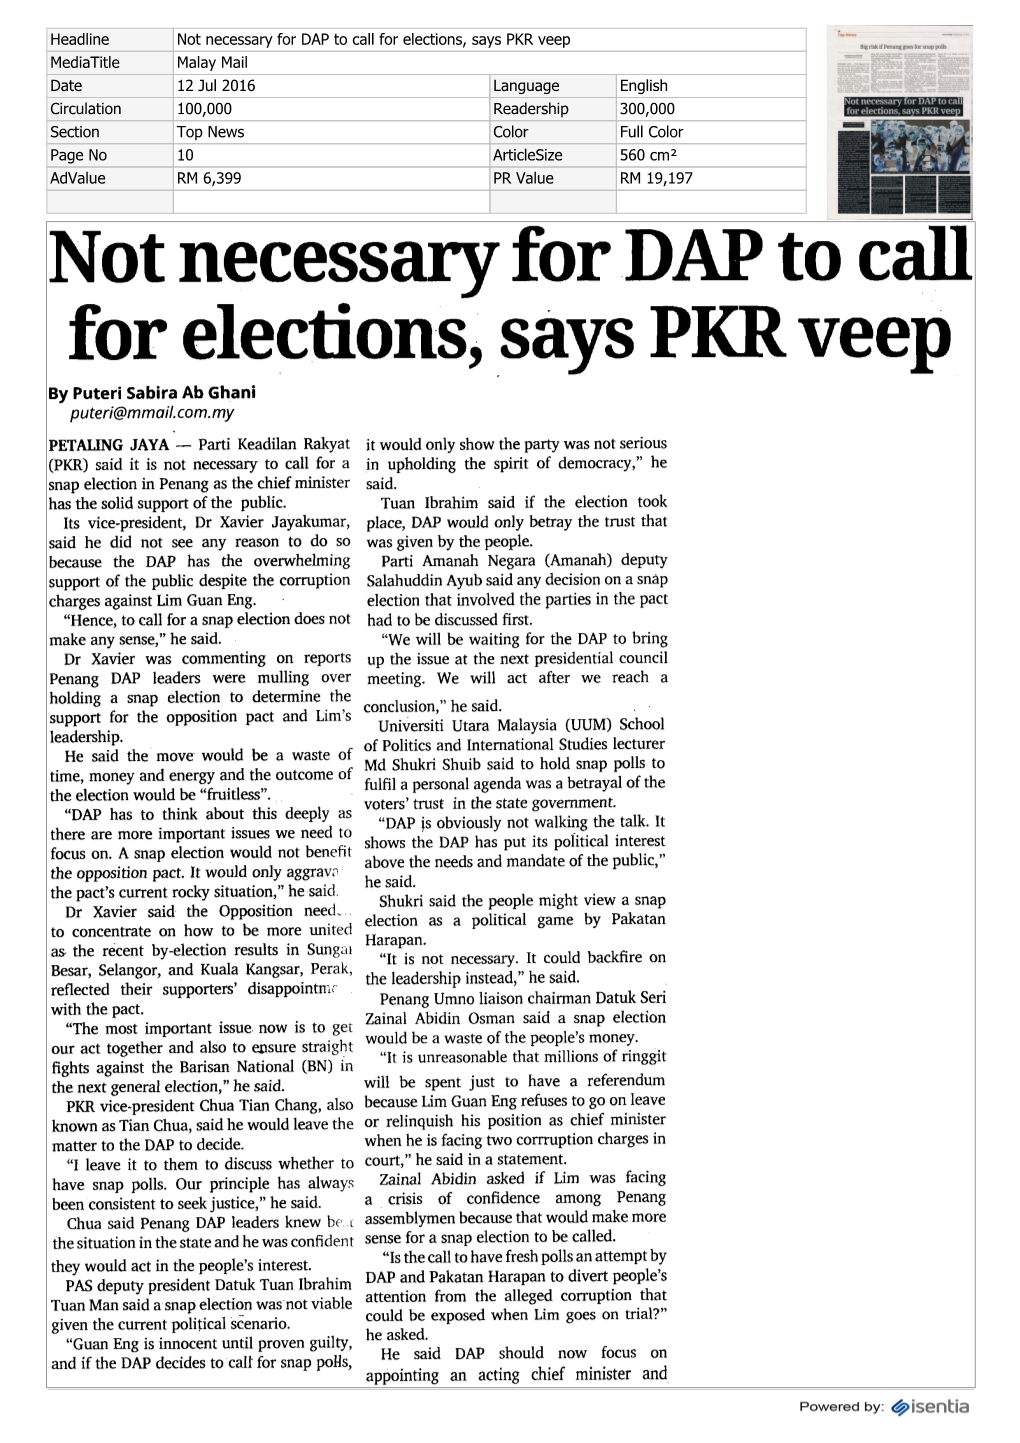 Not Necessary for DAP to Call for Elections, Says PKR Veep